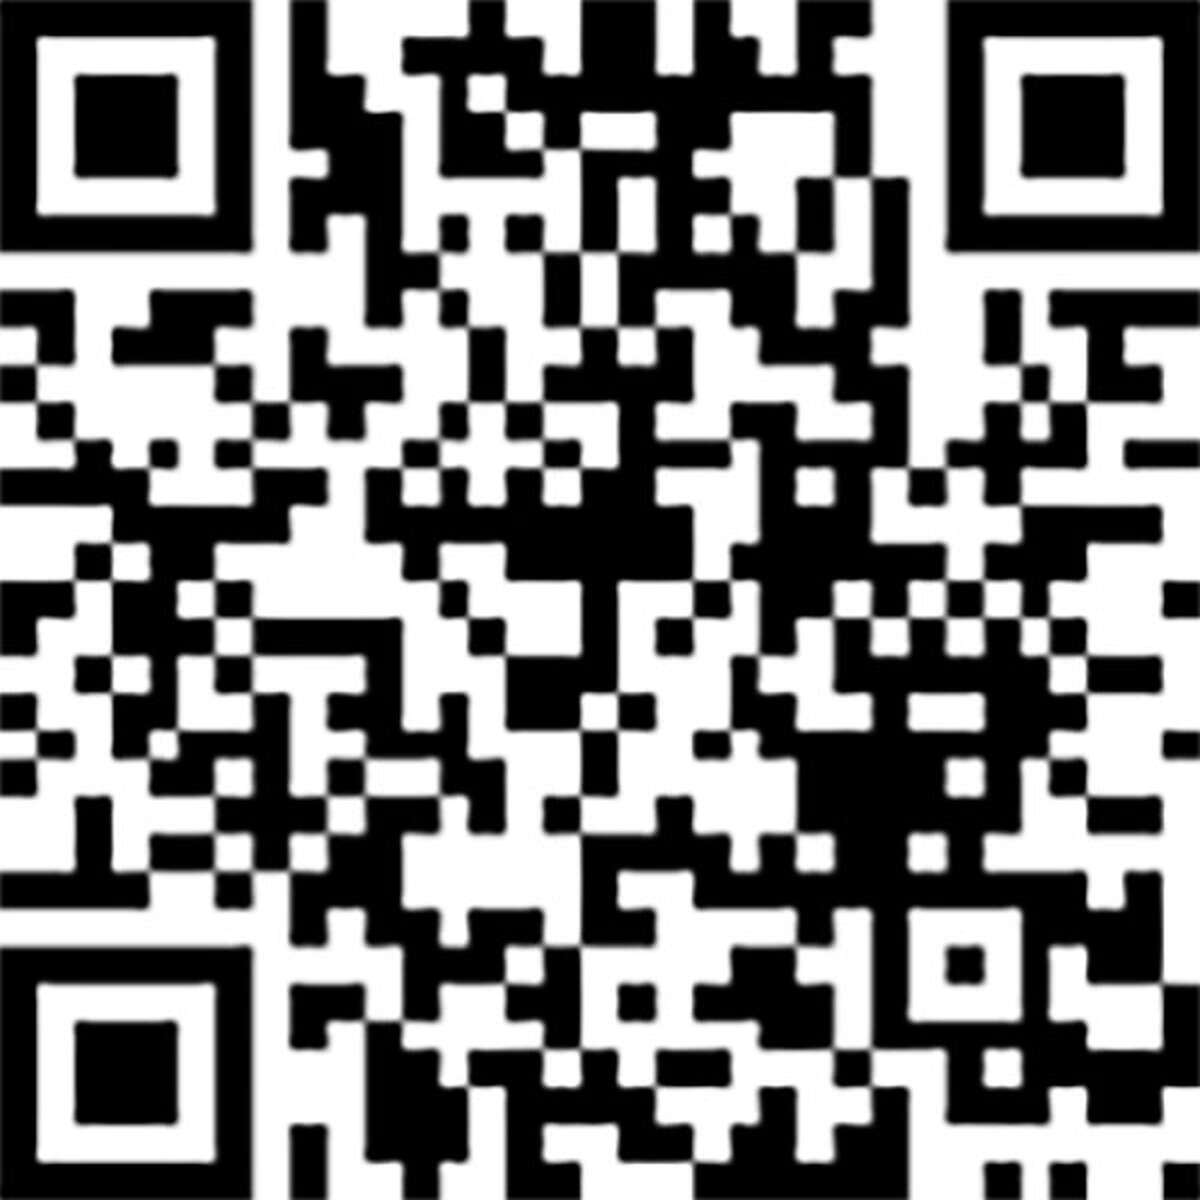 To donate online to the Mecosta County Commission on Aging during Community Giving Day, scan this QR code with a smartphone.